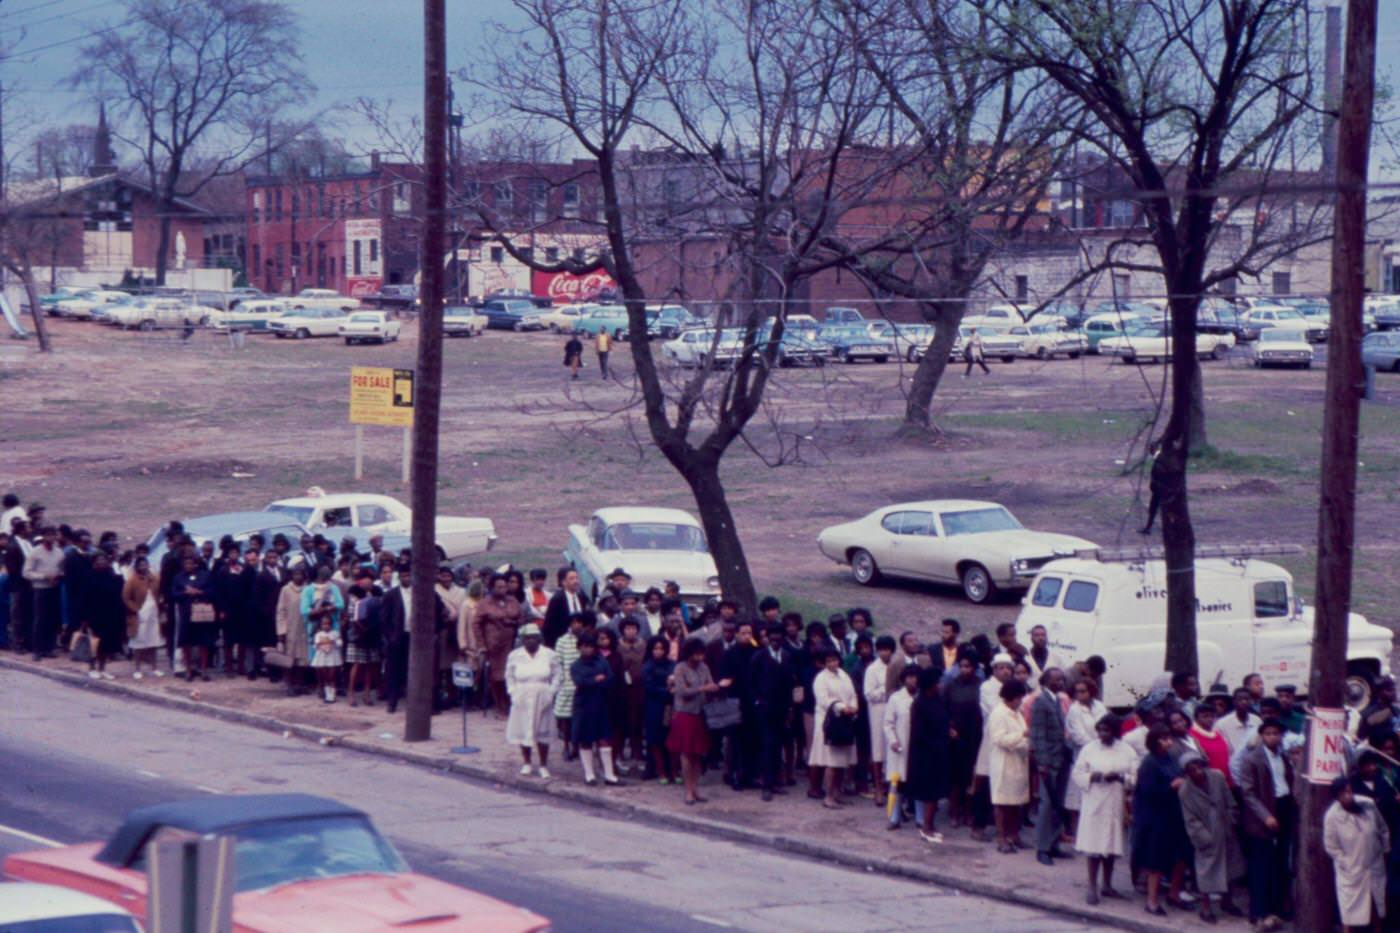 Mourners as they wait in line for Dr Martin Luther King Jr's funeral (at Ebenezer Baptist Church), Atlanta, Georgia, April 9, 1968.